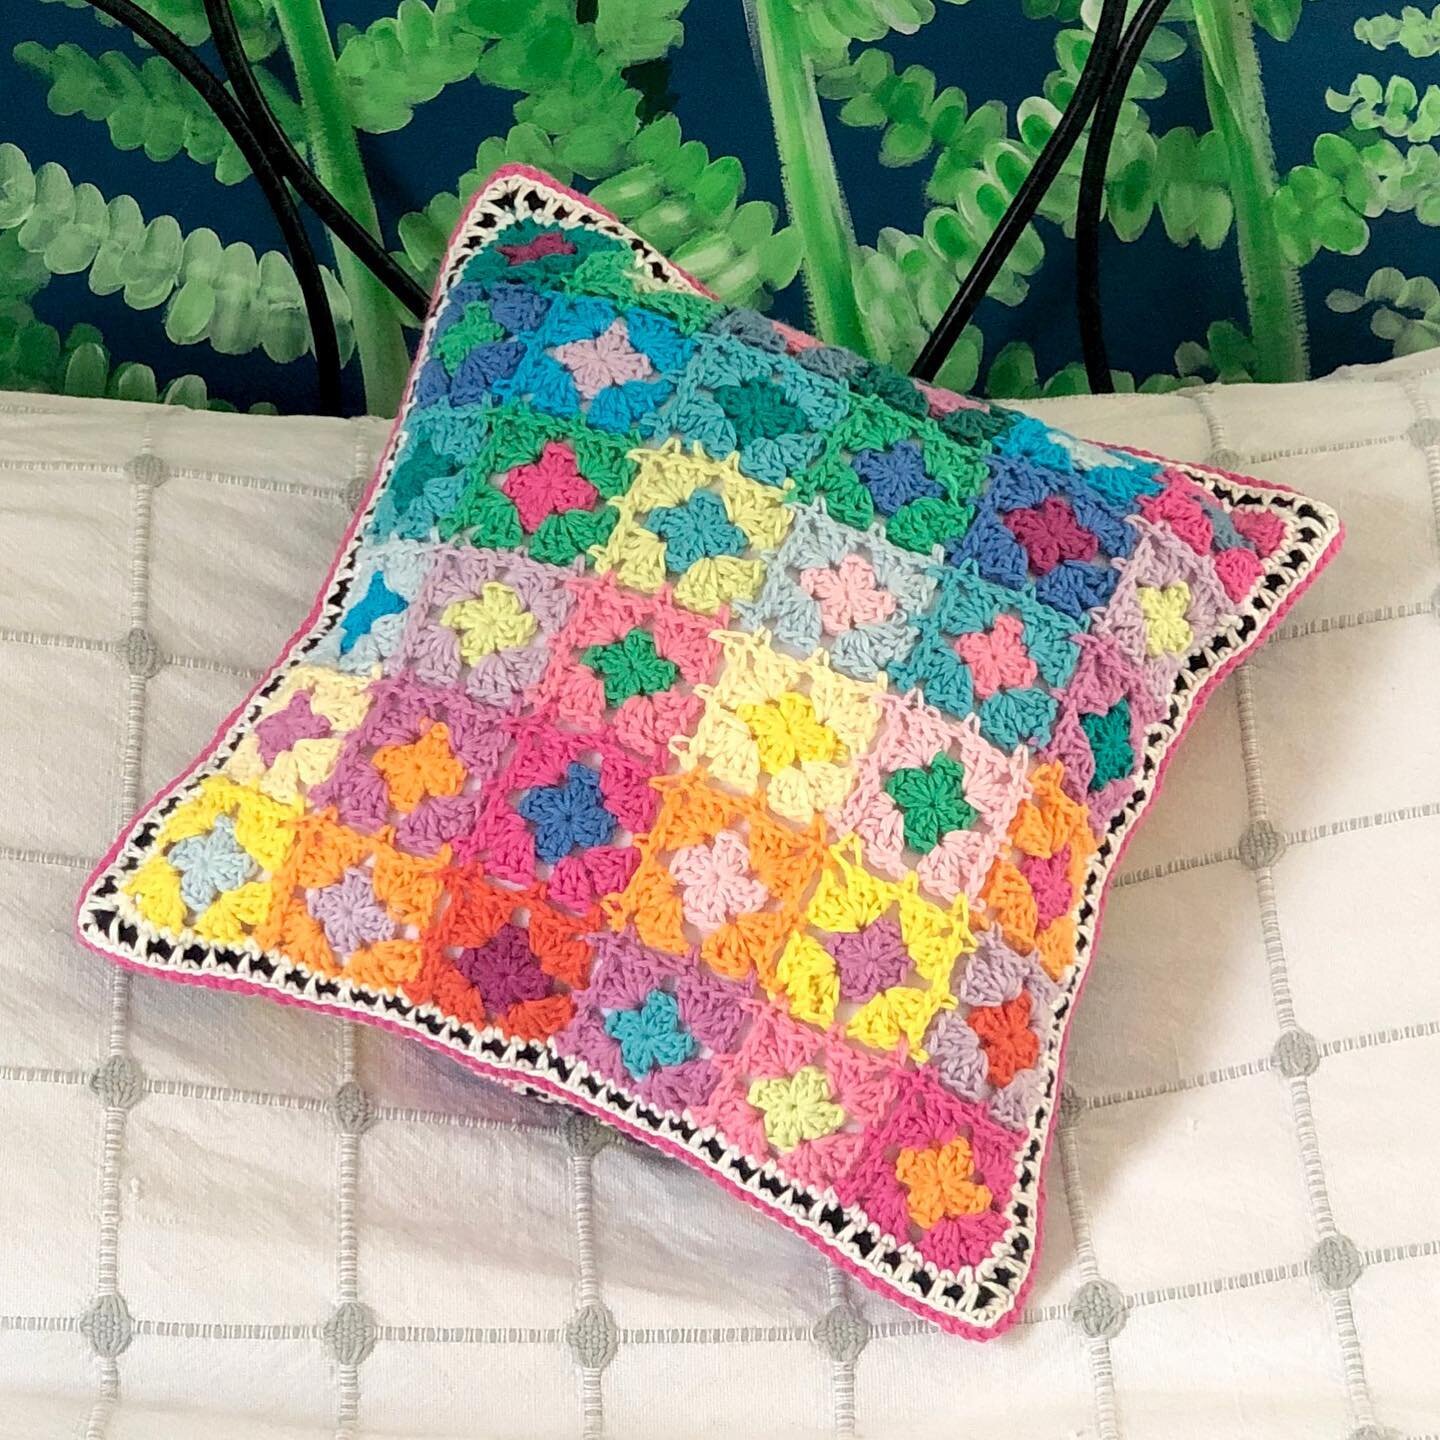 Yarn packs are back in stock! I have a small amount of yarn packs available to make this colourful join as you go granny cushion &hellip; includes the pattern with 24 colour photos to guide you every step of the way. The pattern can be easily adapted